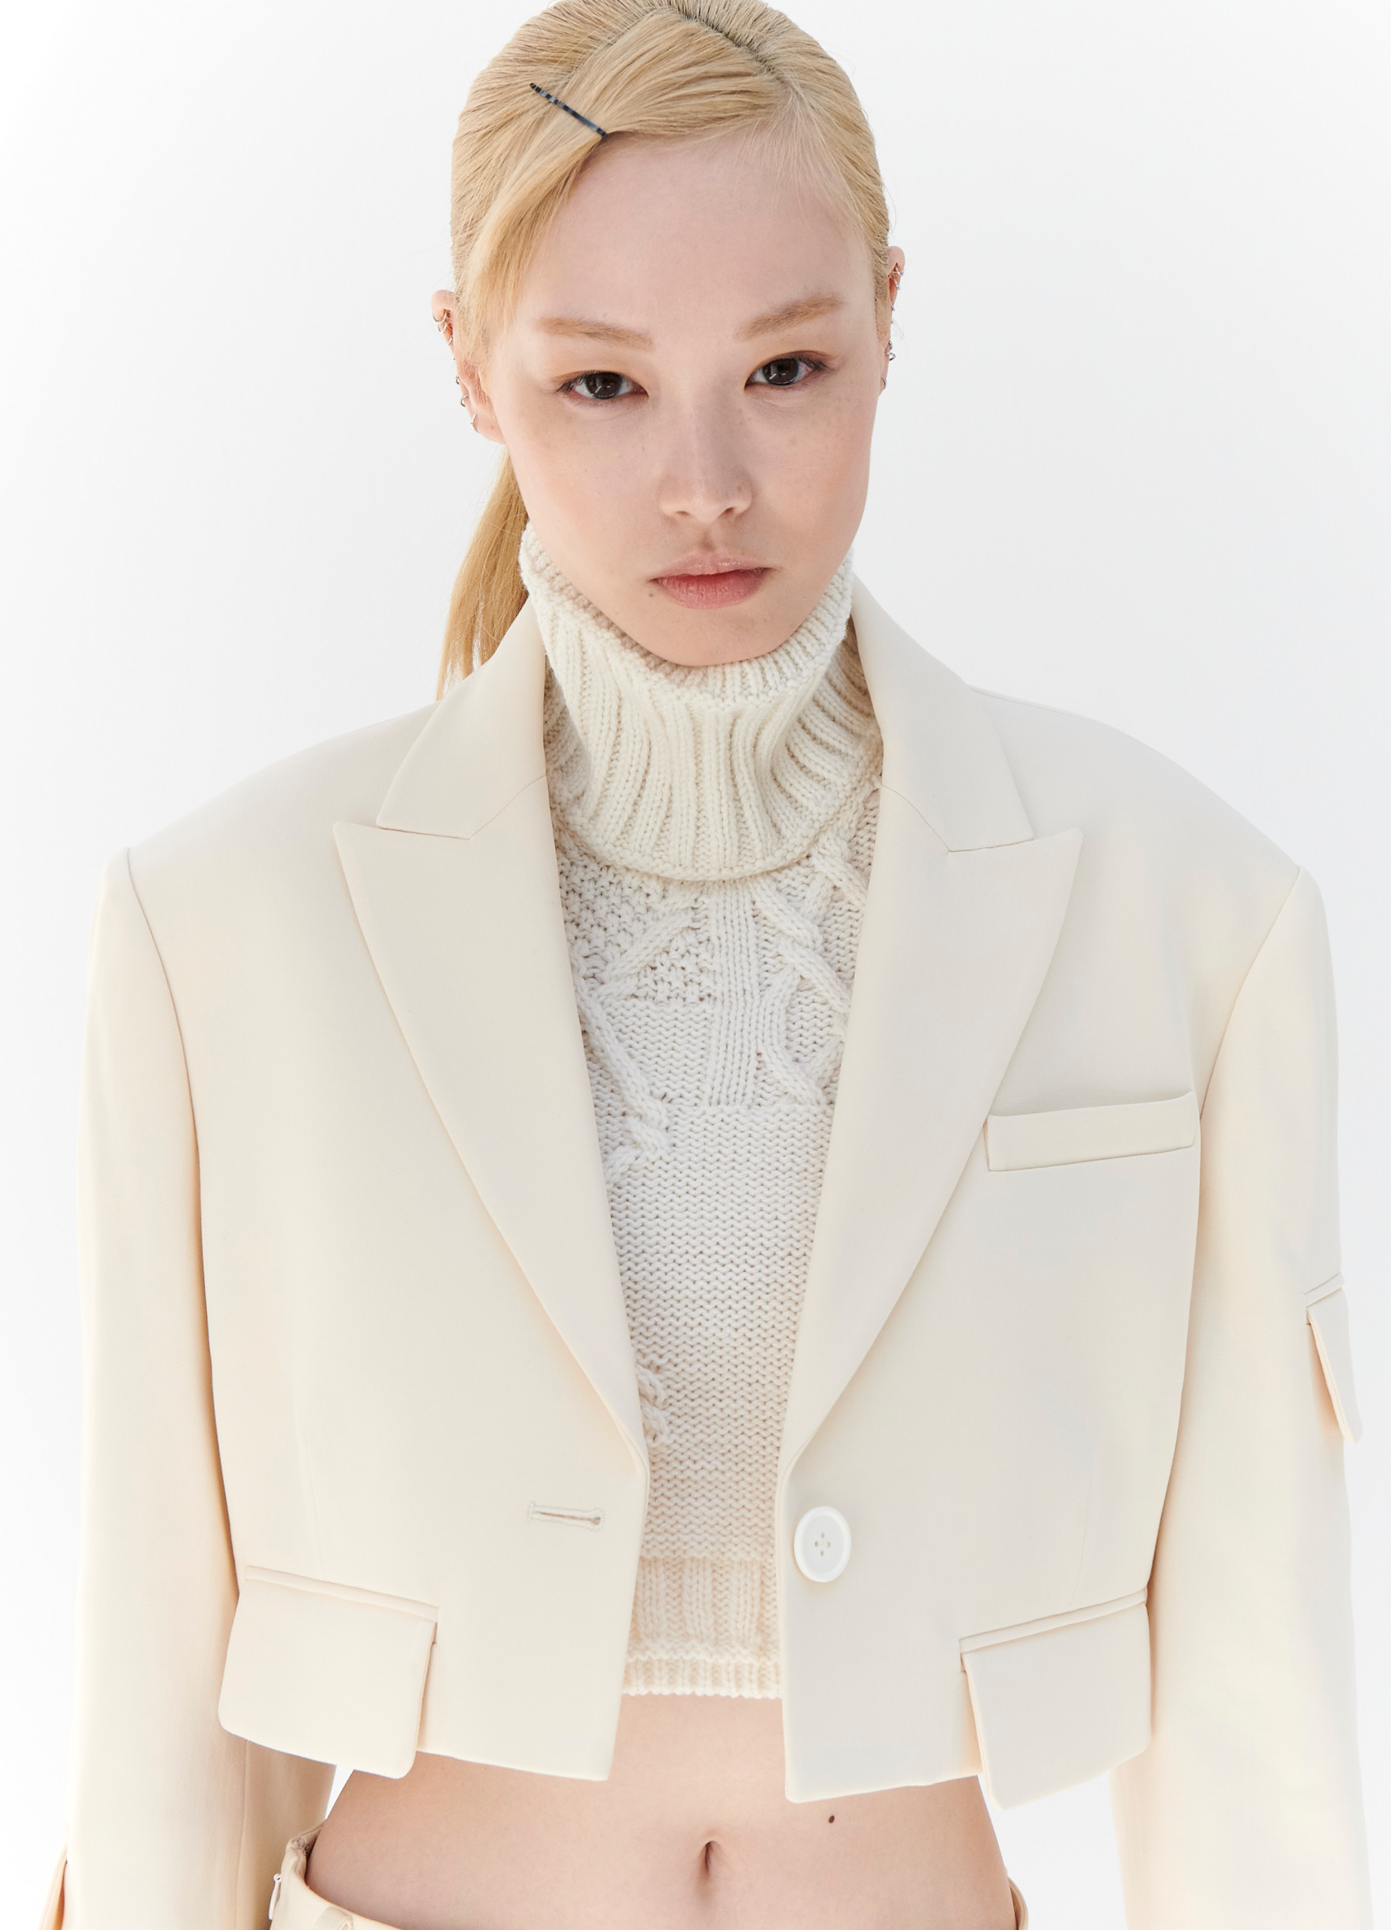 MONSE Cropped Jacket in Ivory on model front detail view